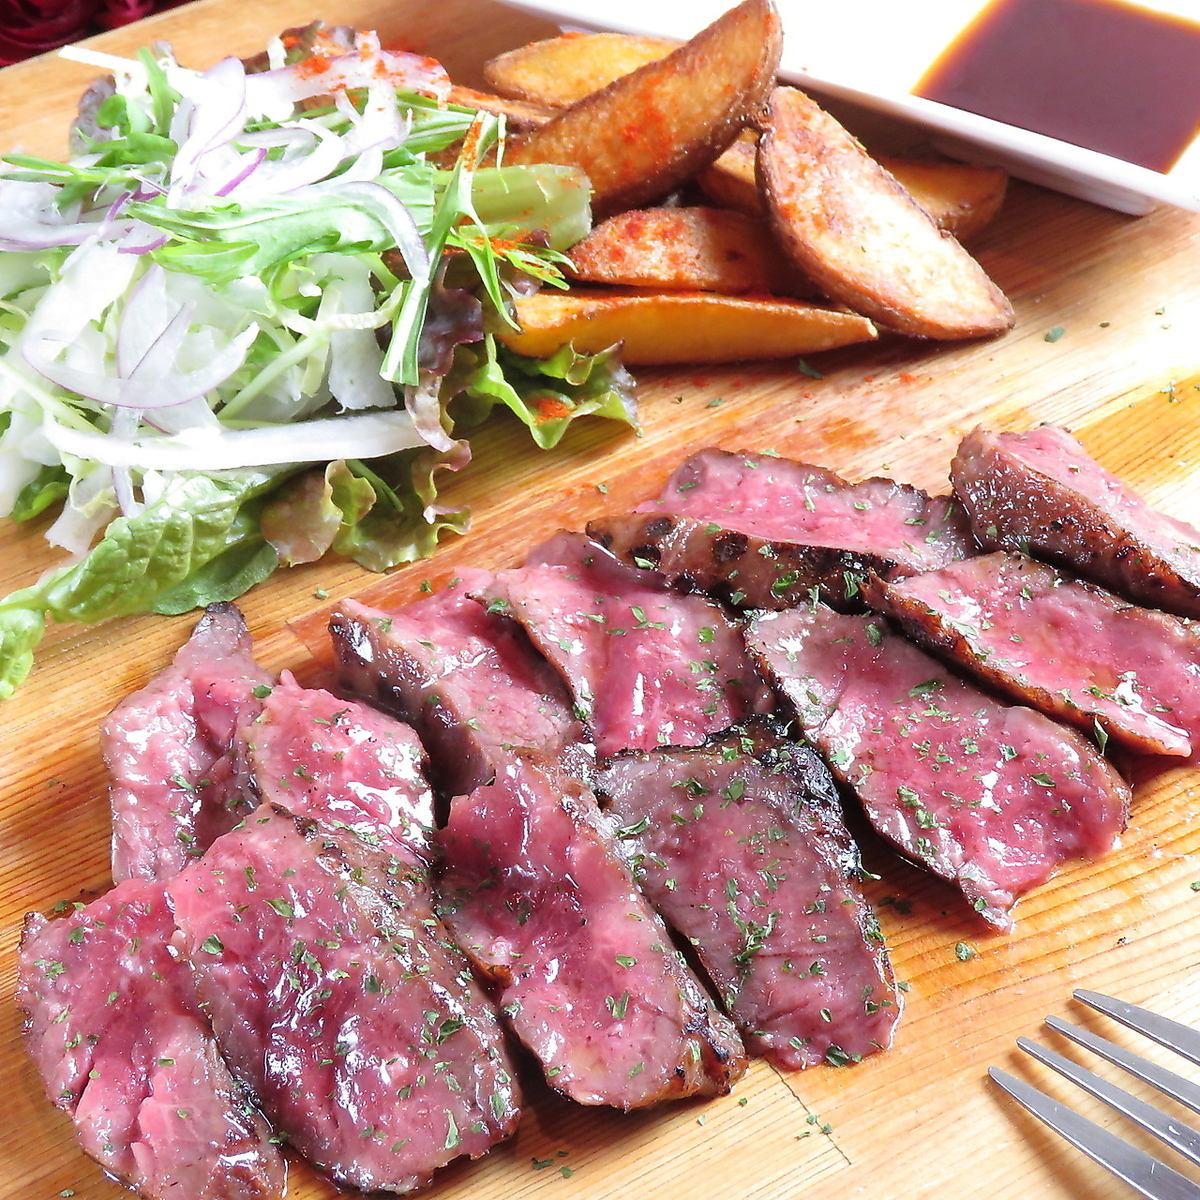 Aged steak with a glass of wine in one hand♪ The more you chew, the more delicious it becomes